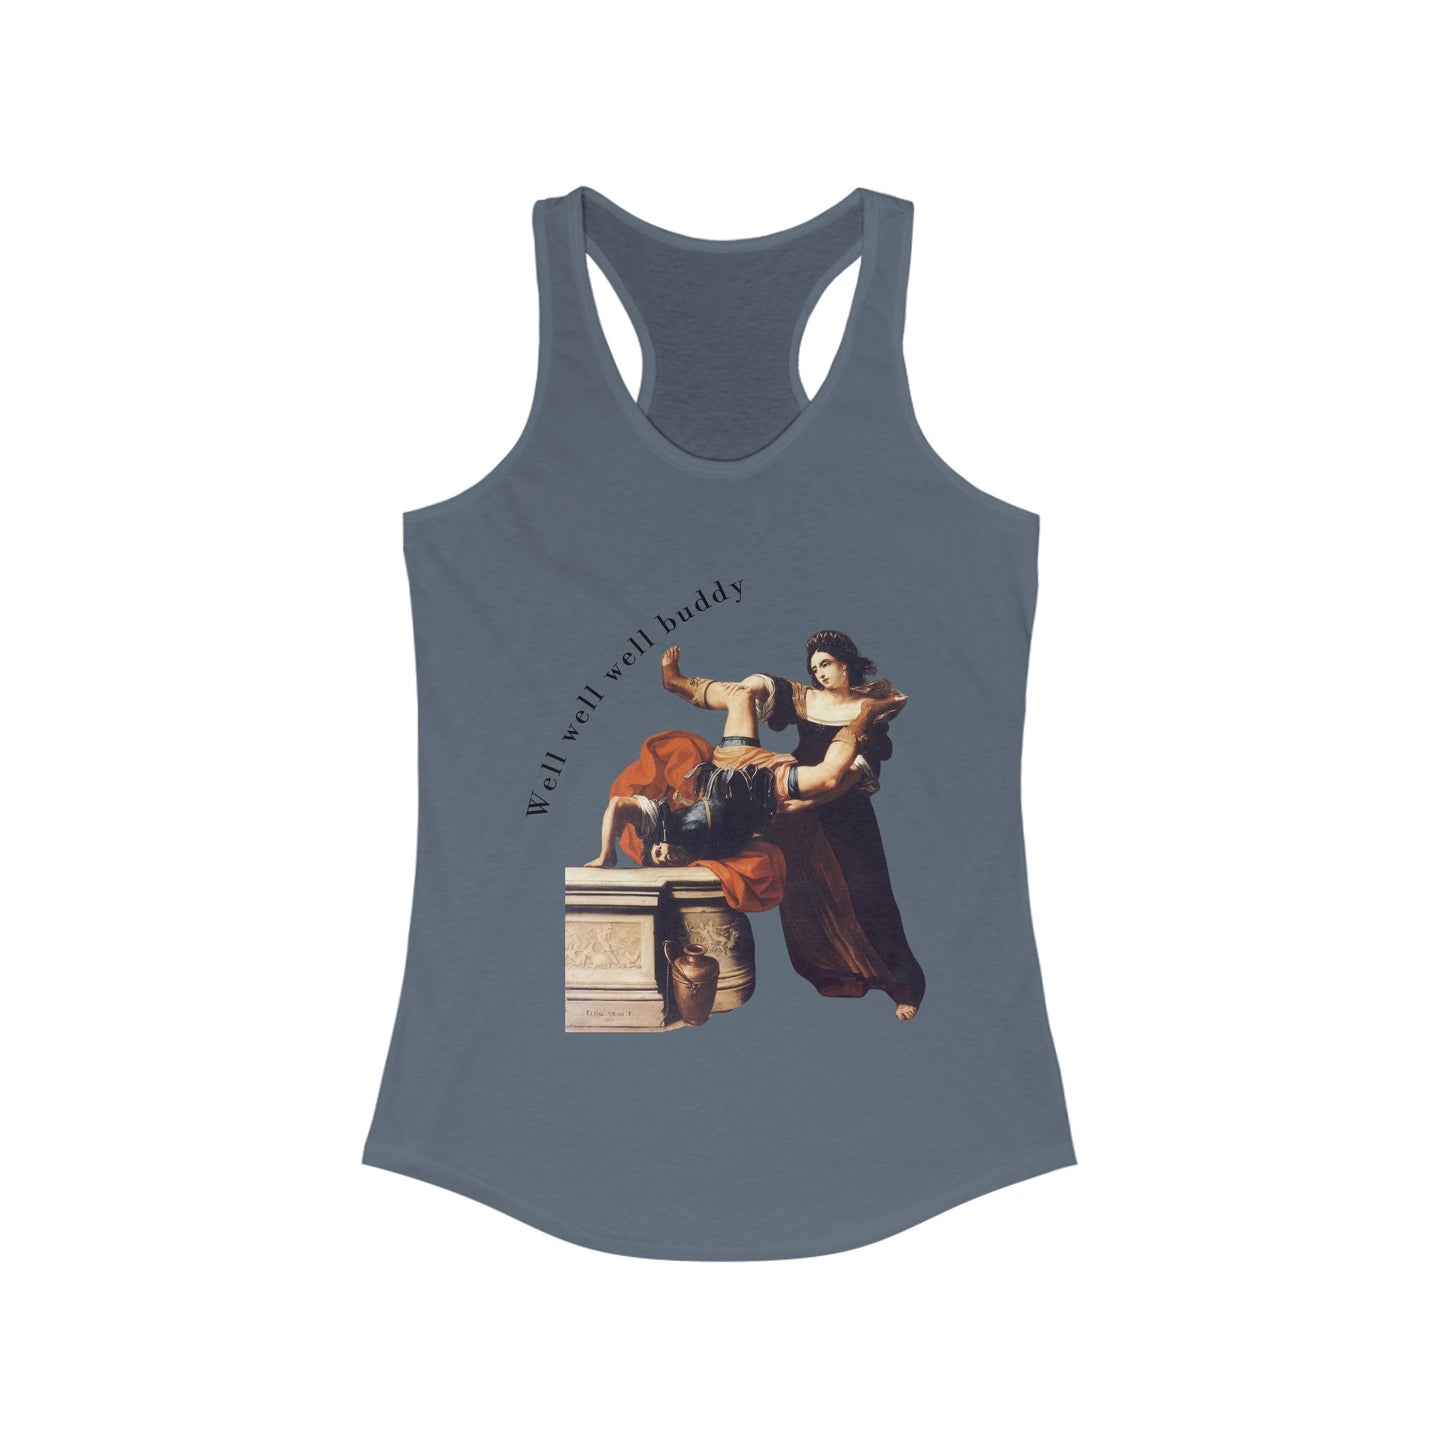 Well Well Well Buddy Timoclea Kills the Captain of Alexander the Great Women's Ideal Racerback Tank